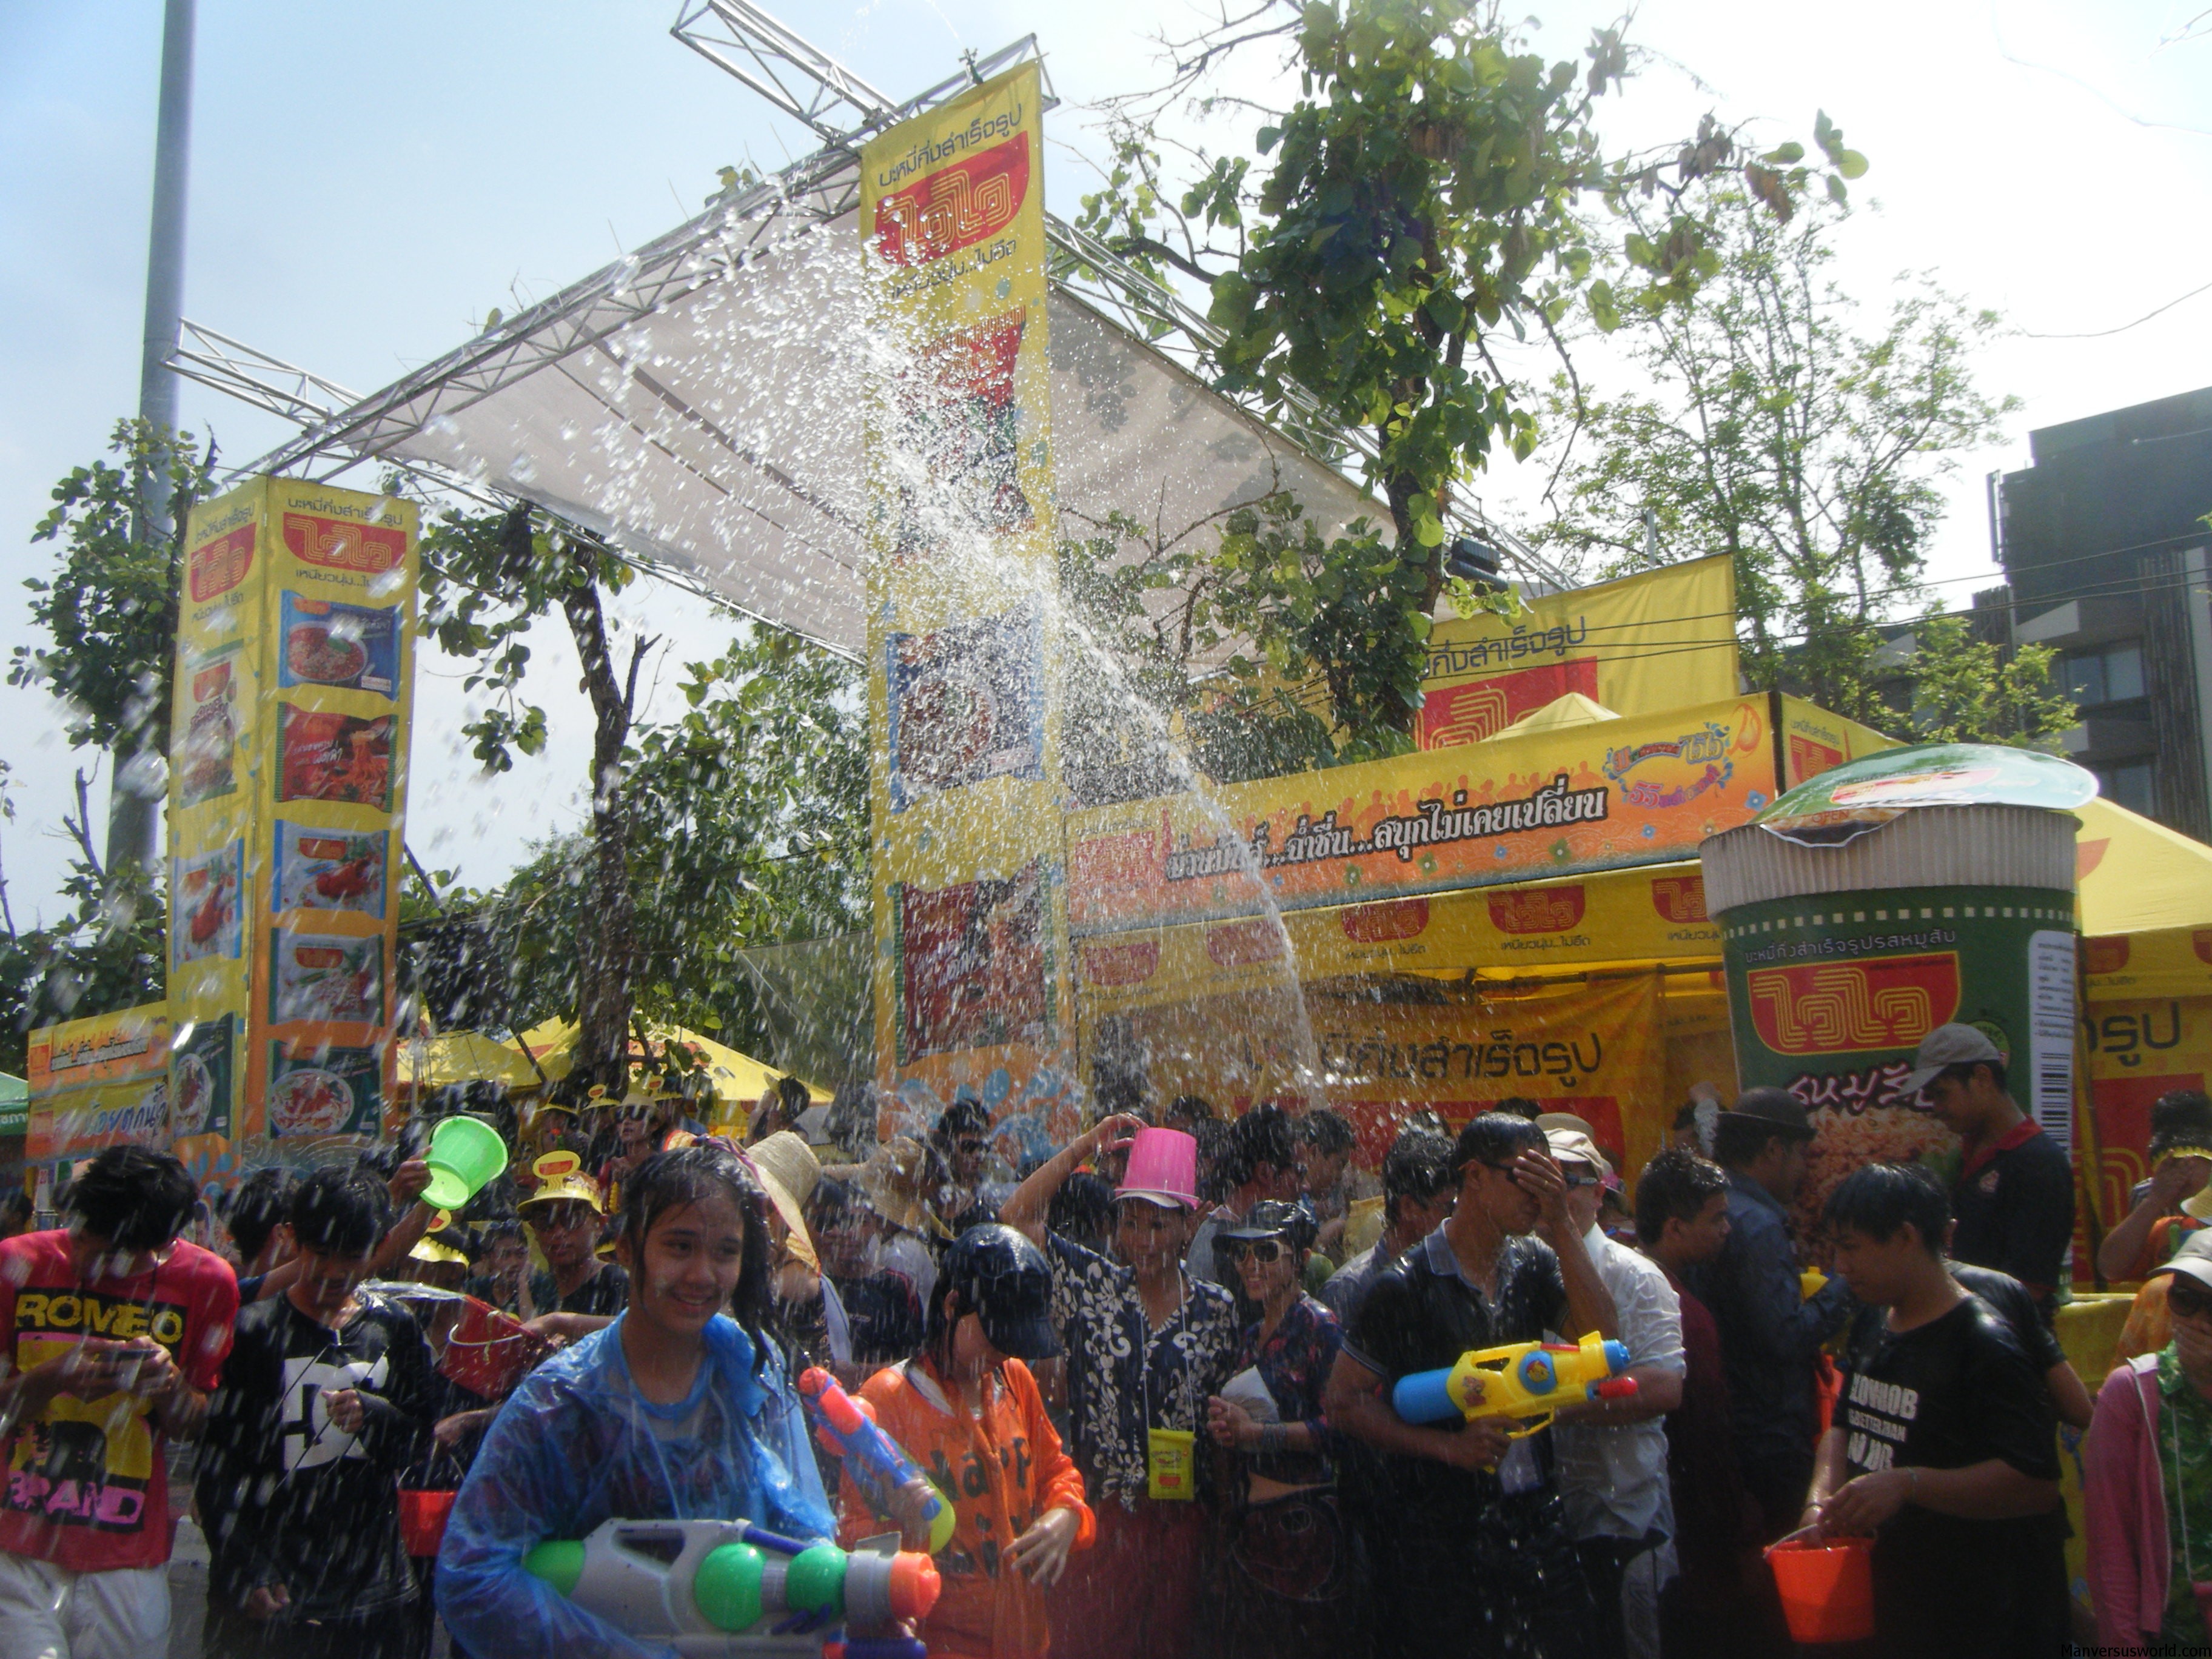 The crowd gets soaked at Songkran in Chiang Mai, Thailand